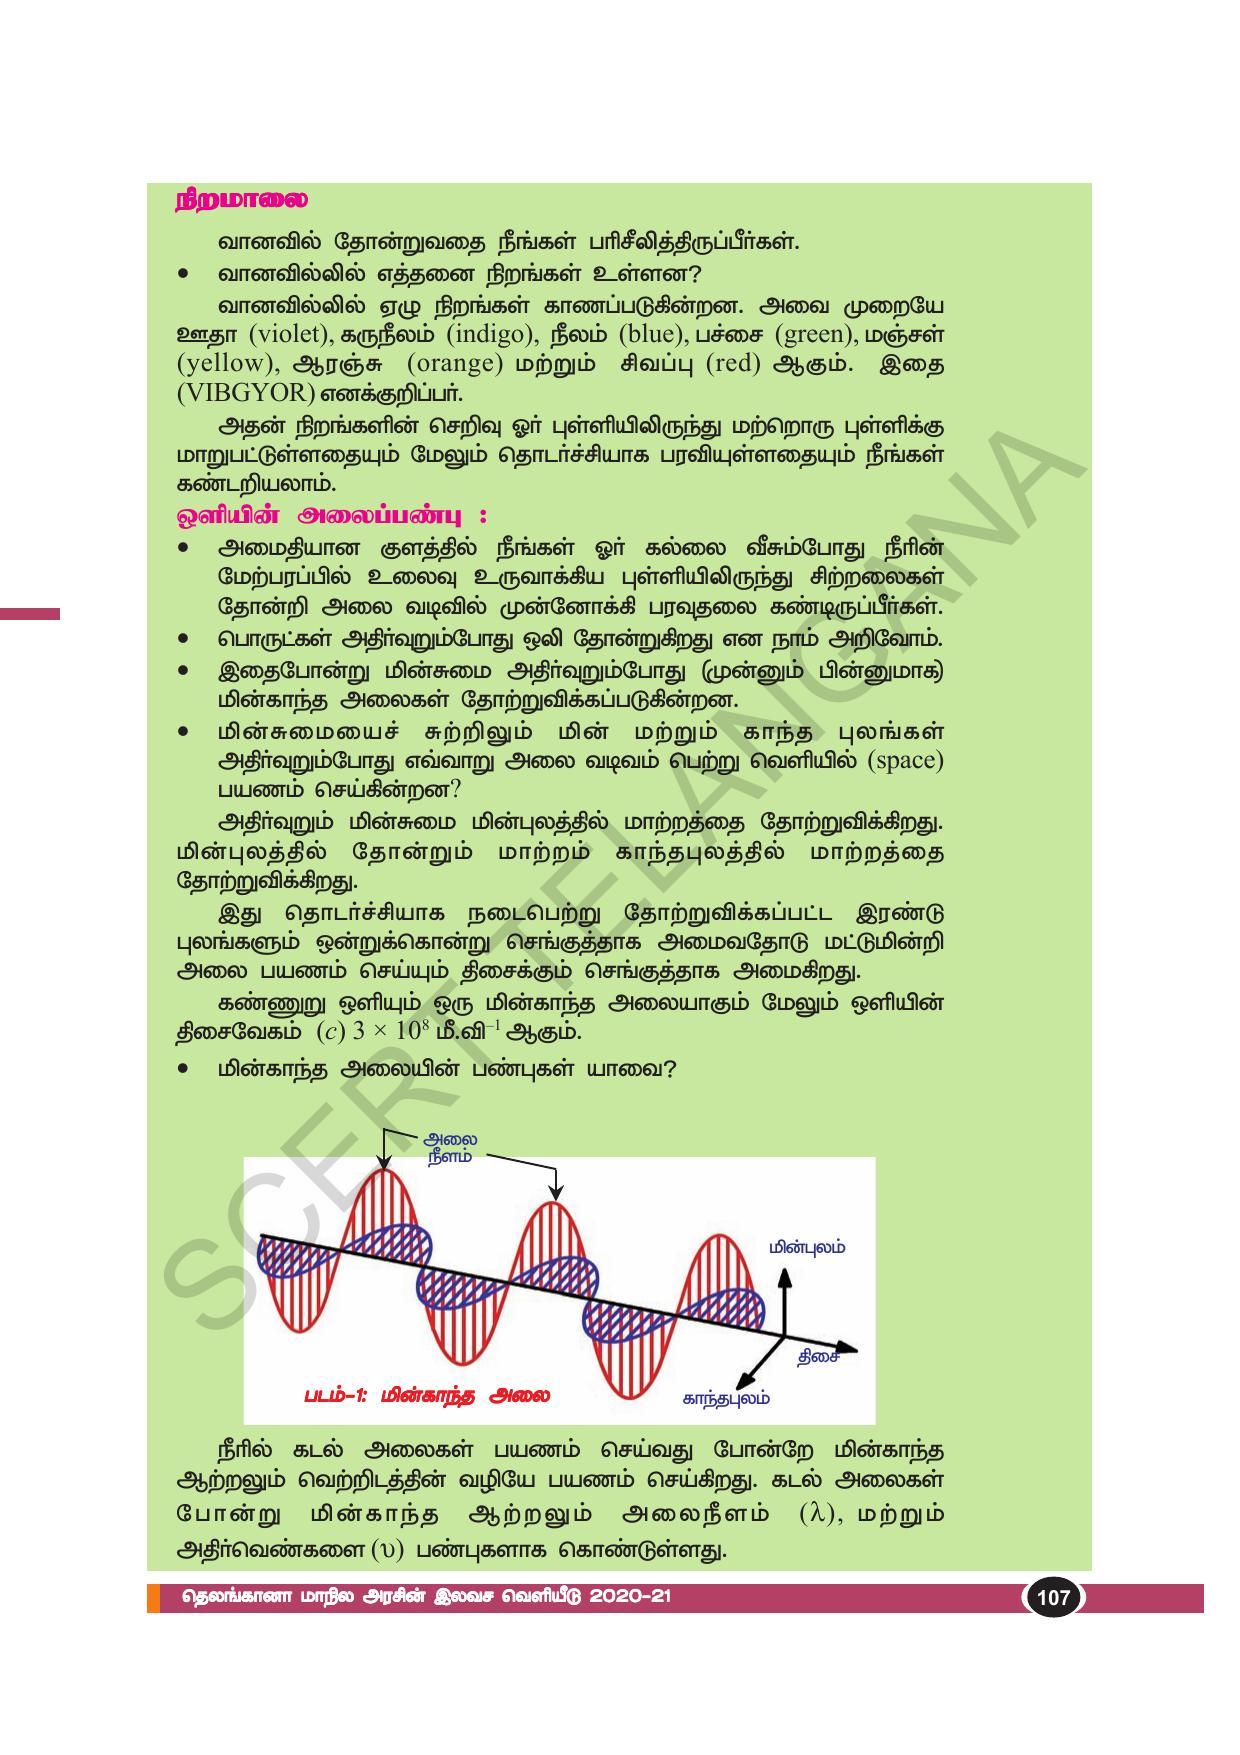 TS SCERT Class 10 Physical Science(Tamil Medium) Text Book - Page 119